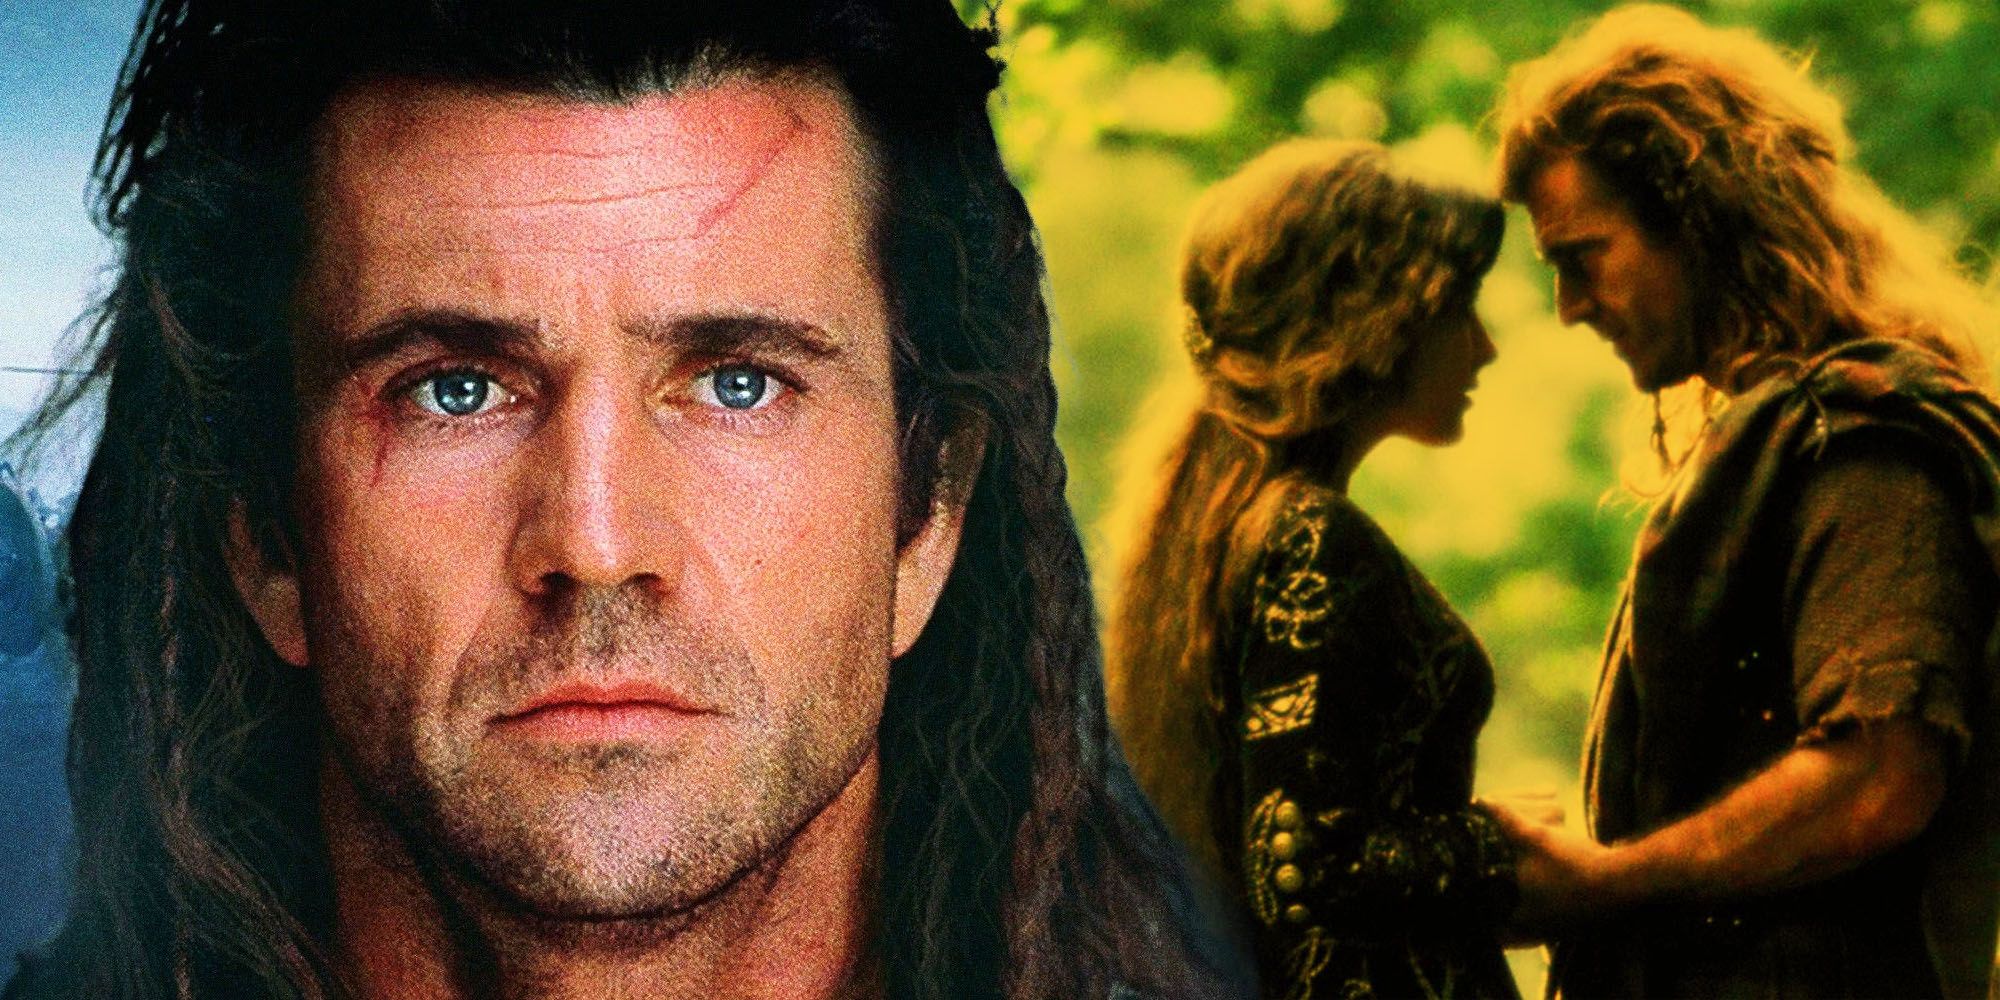 braveheart-jus-primae-noctis-not-real-medieval-historian